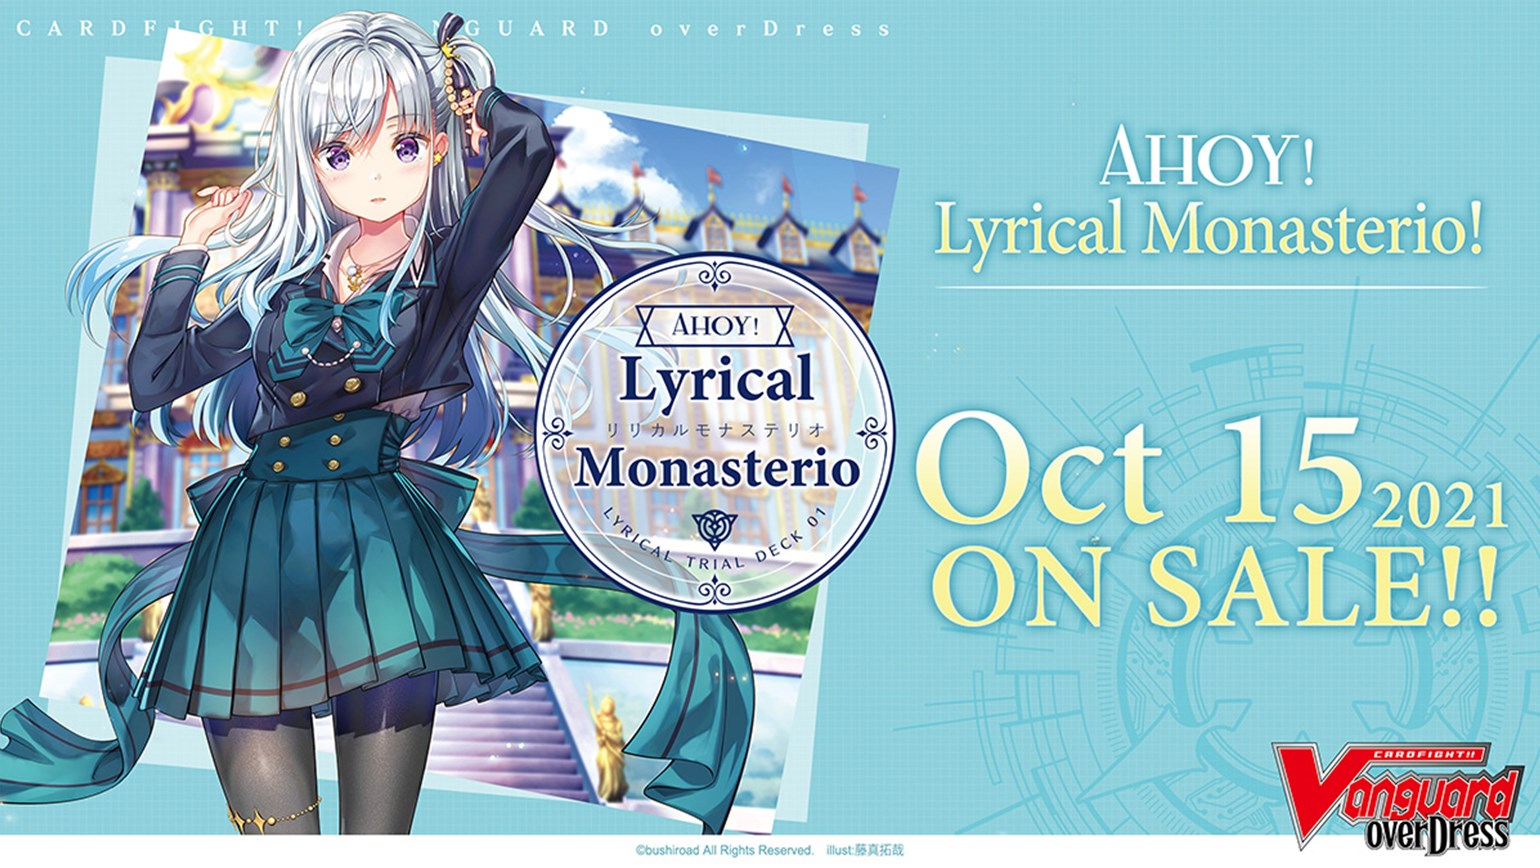 English Edition overDress Lyrical Trial Deck 01: Ahoy! Lyrical Monasterio!, Coming to Stores on October 15th!